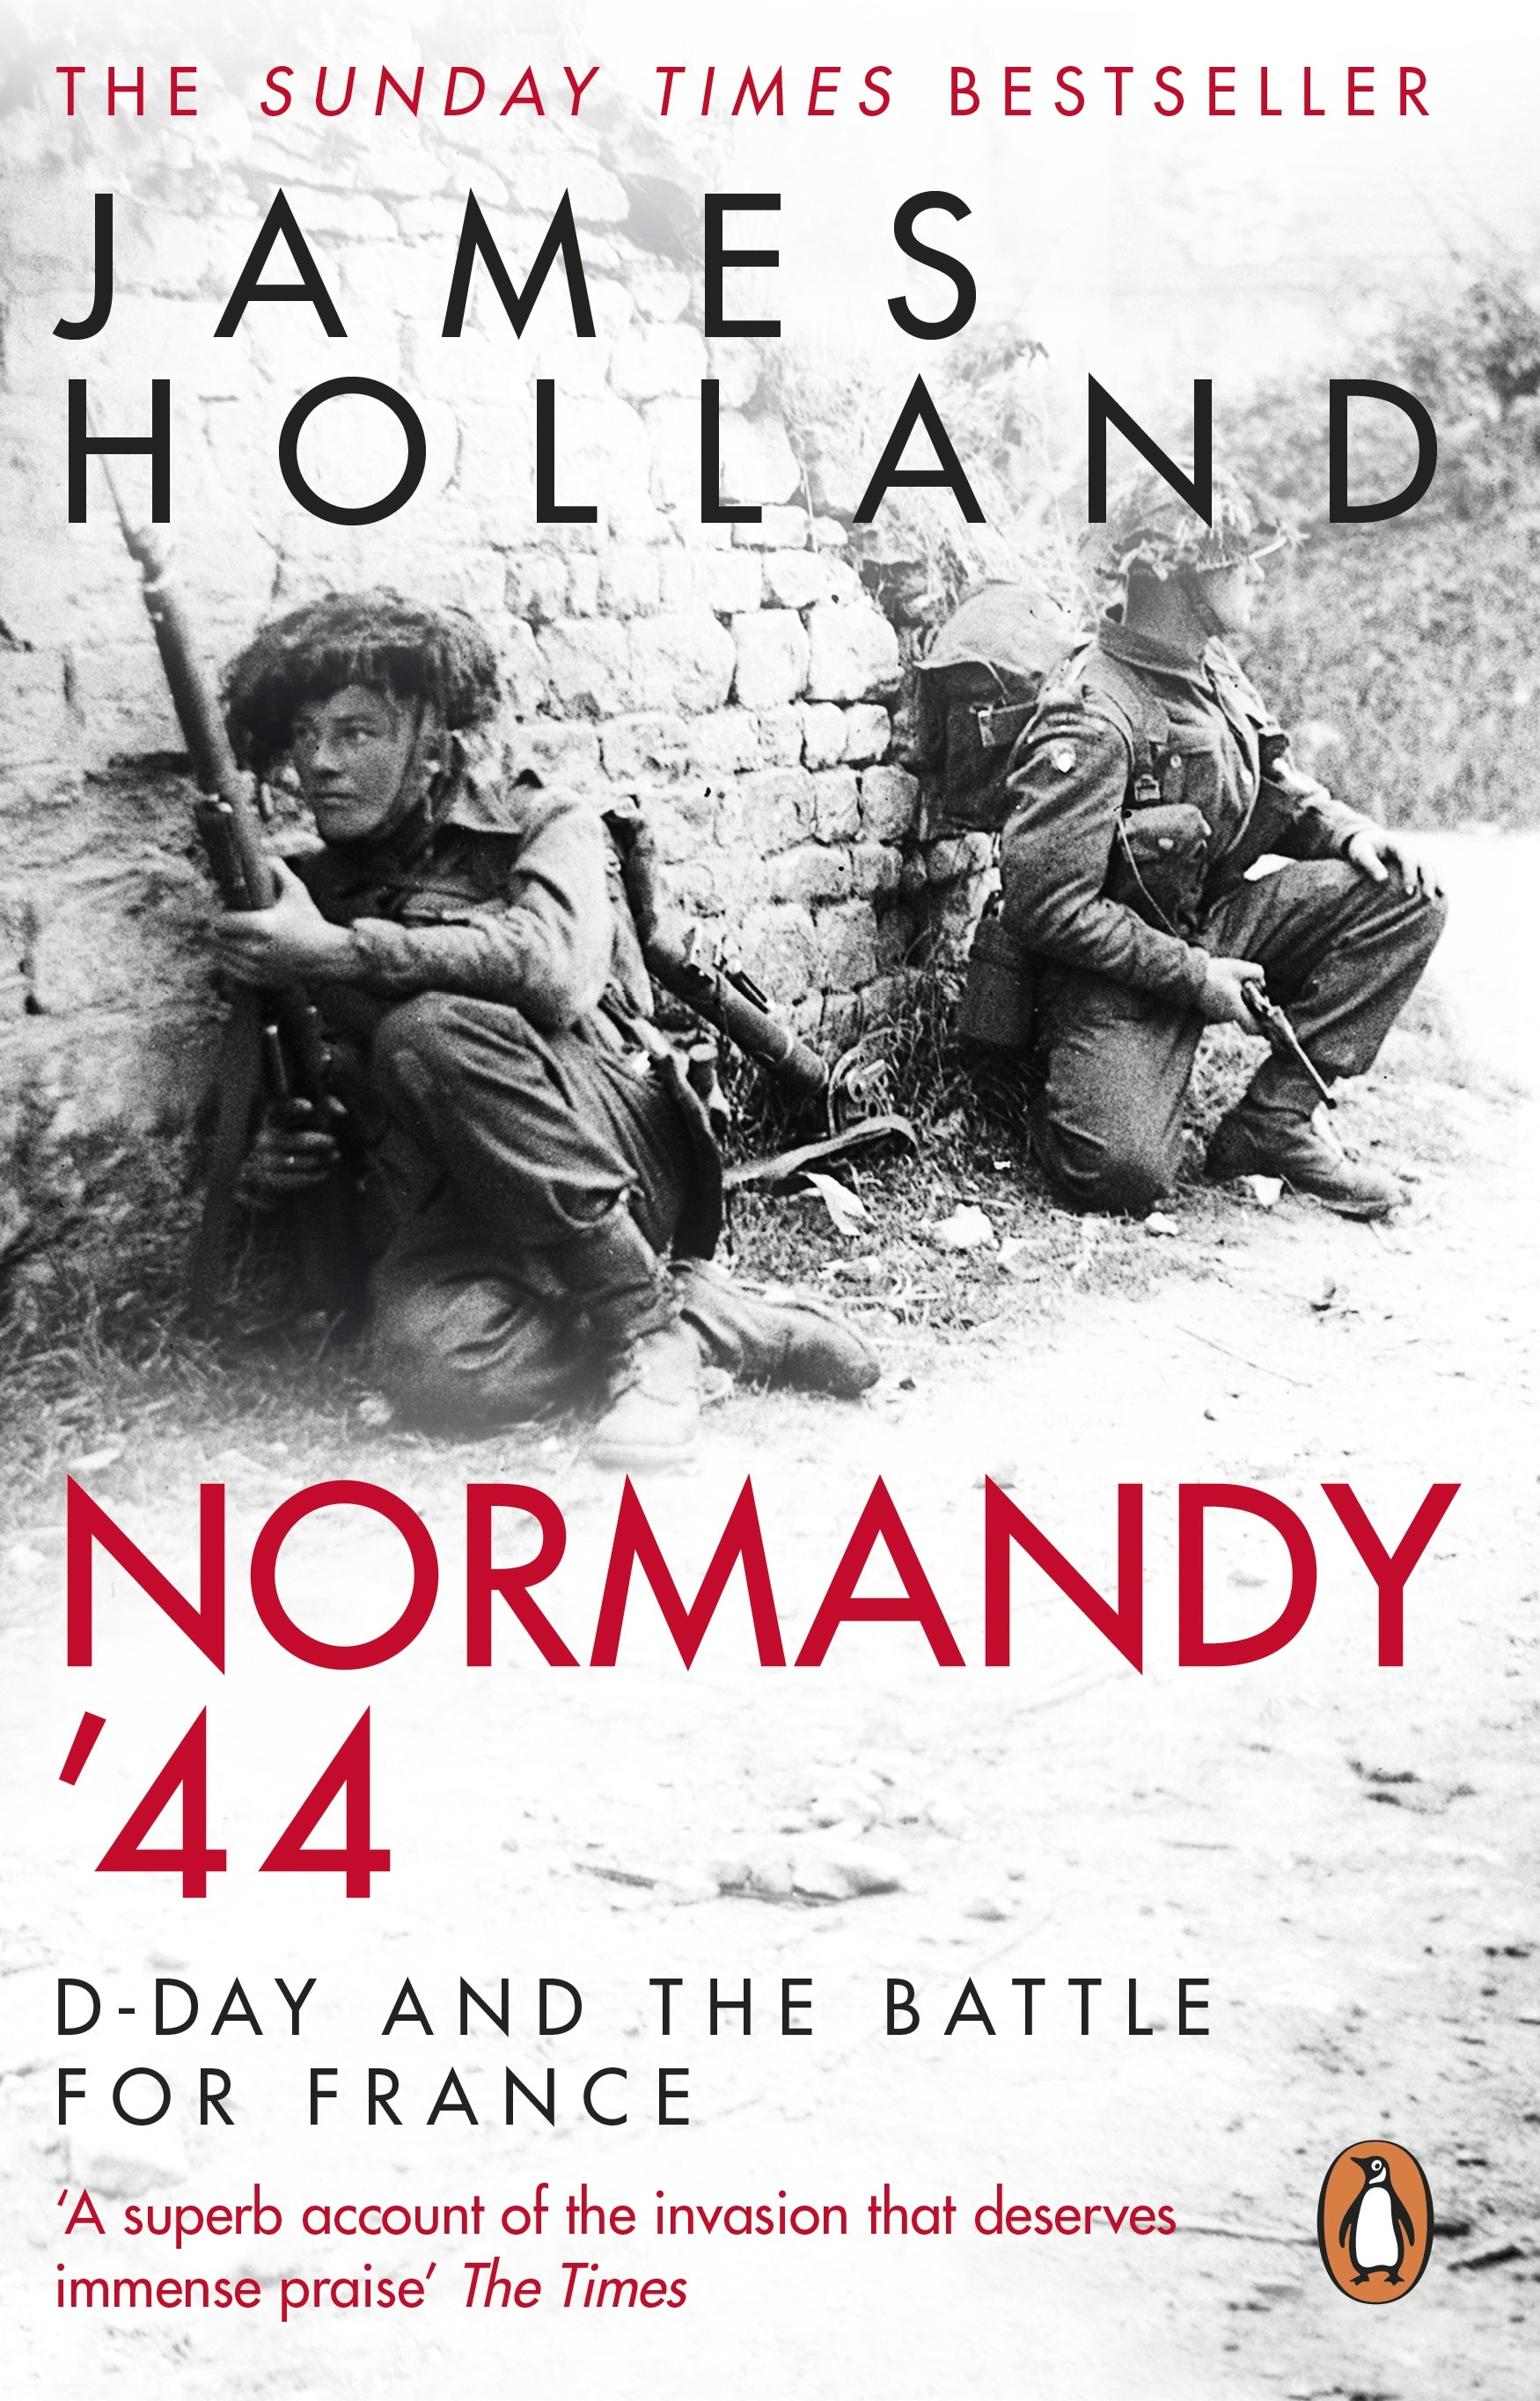 Book “Normandy ‘44” by James Holland — September 3, 2020